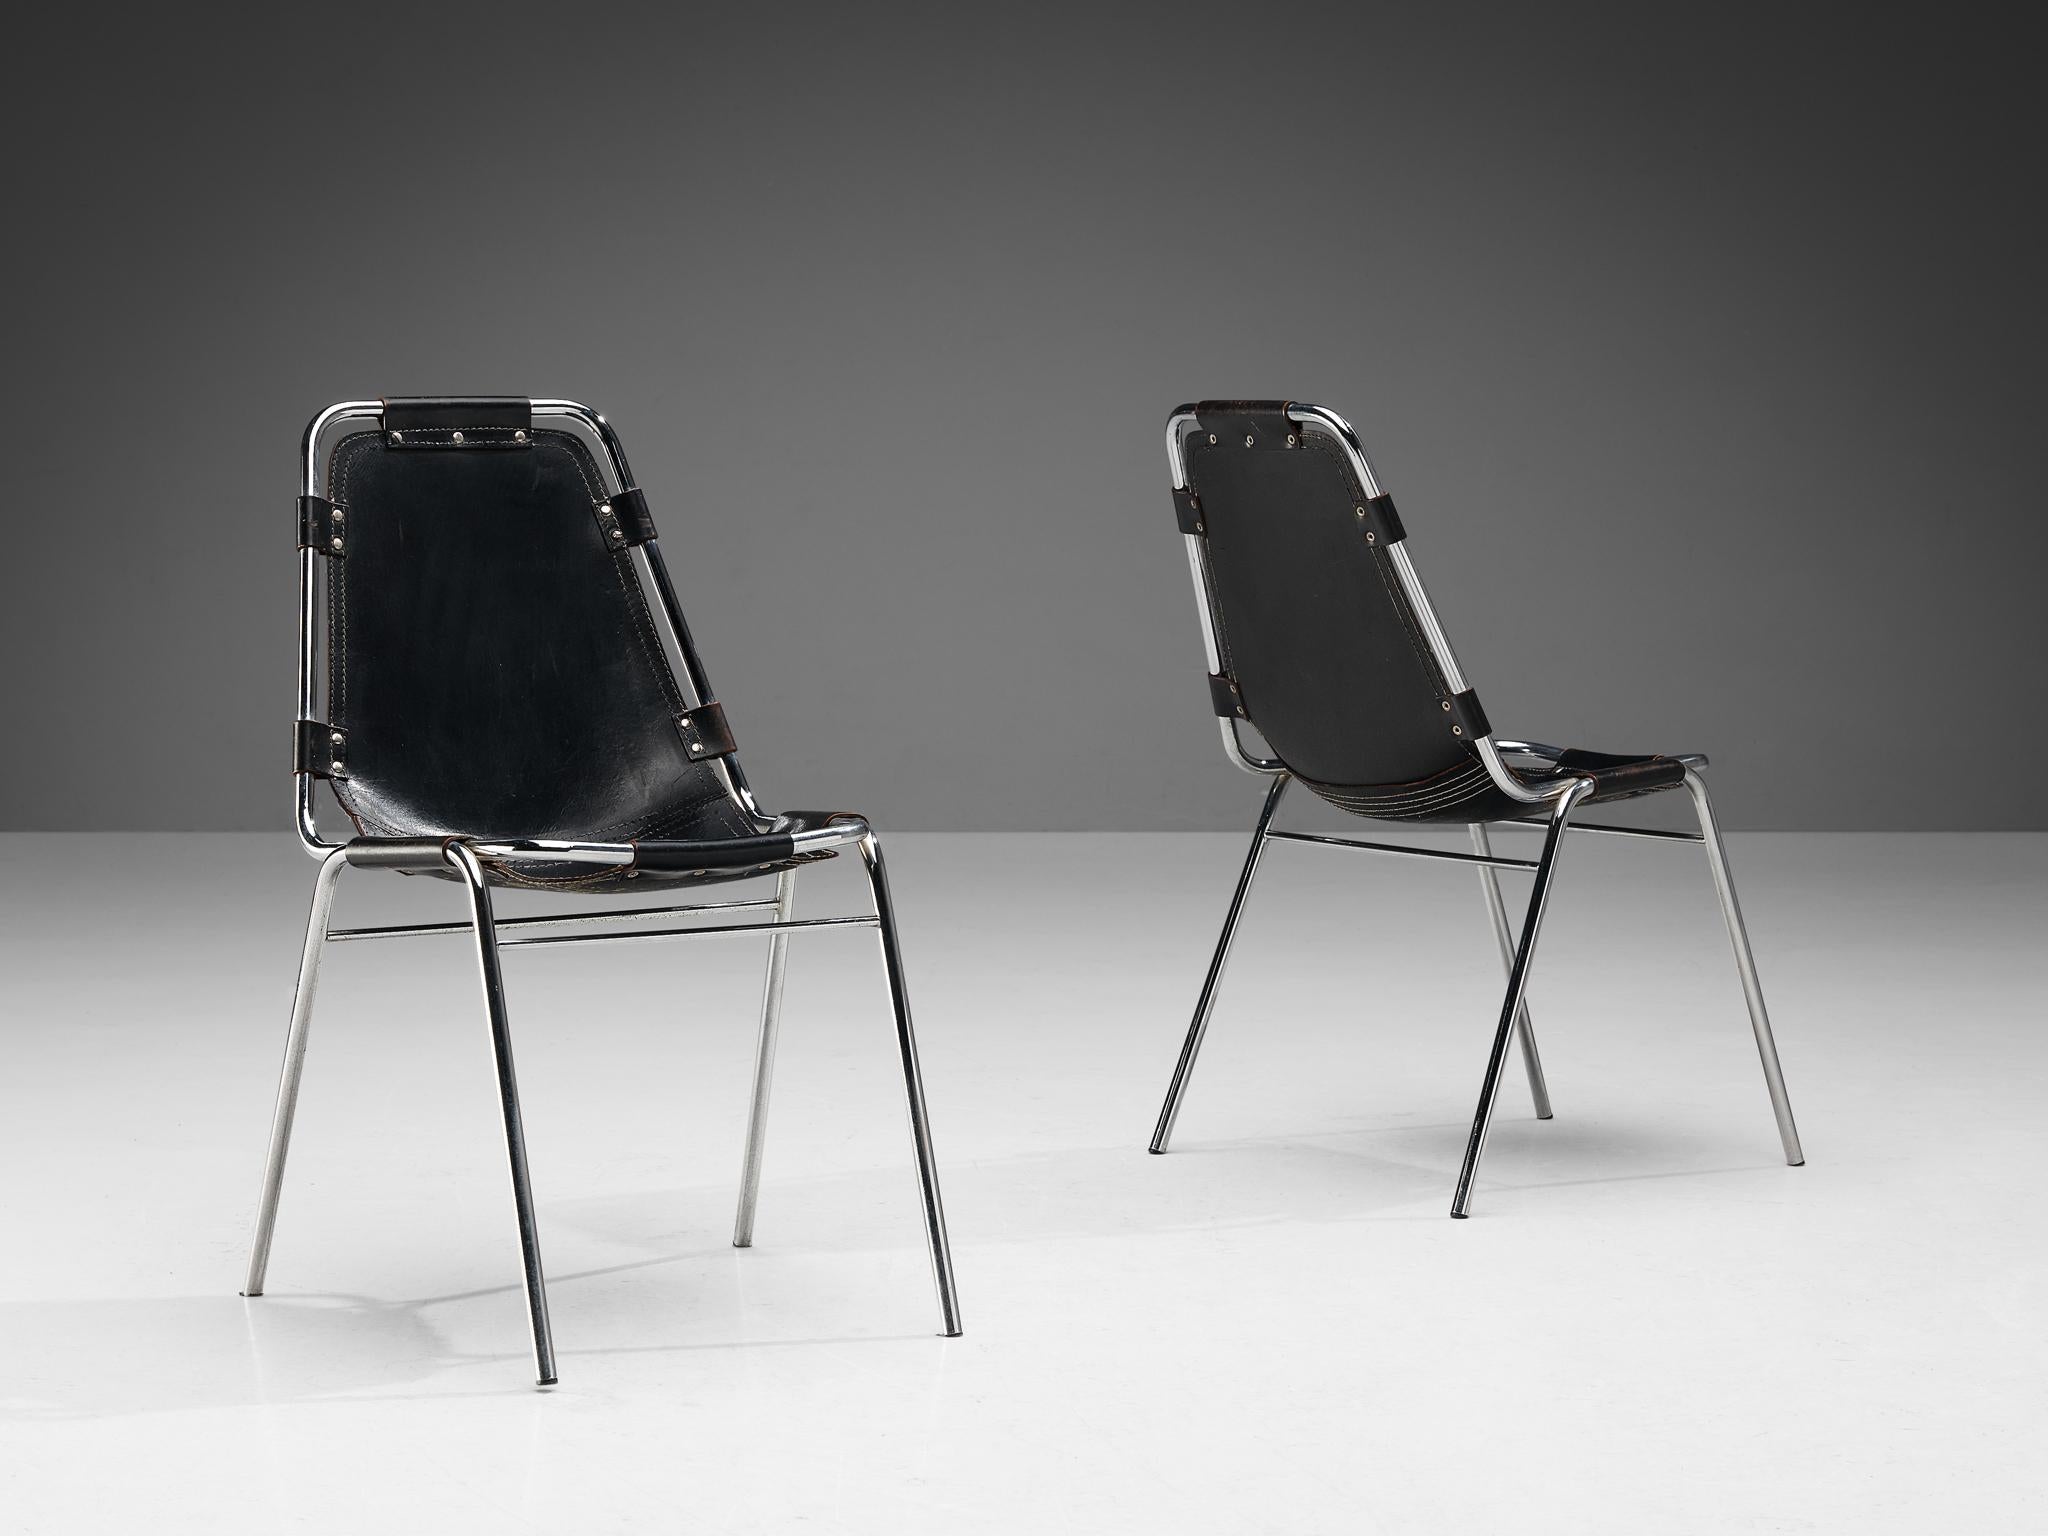 Dal Vera pair of 'Les Arcs' chairs, selected by Charlotte Perriand, pair of dining chairs model 'Les Arcs', black leather, chrome-plated metal, circa 1970 

This well-constructed pair of chairs were manufactured by Dal Vera and selected by Charlotte